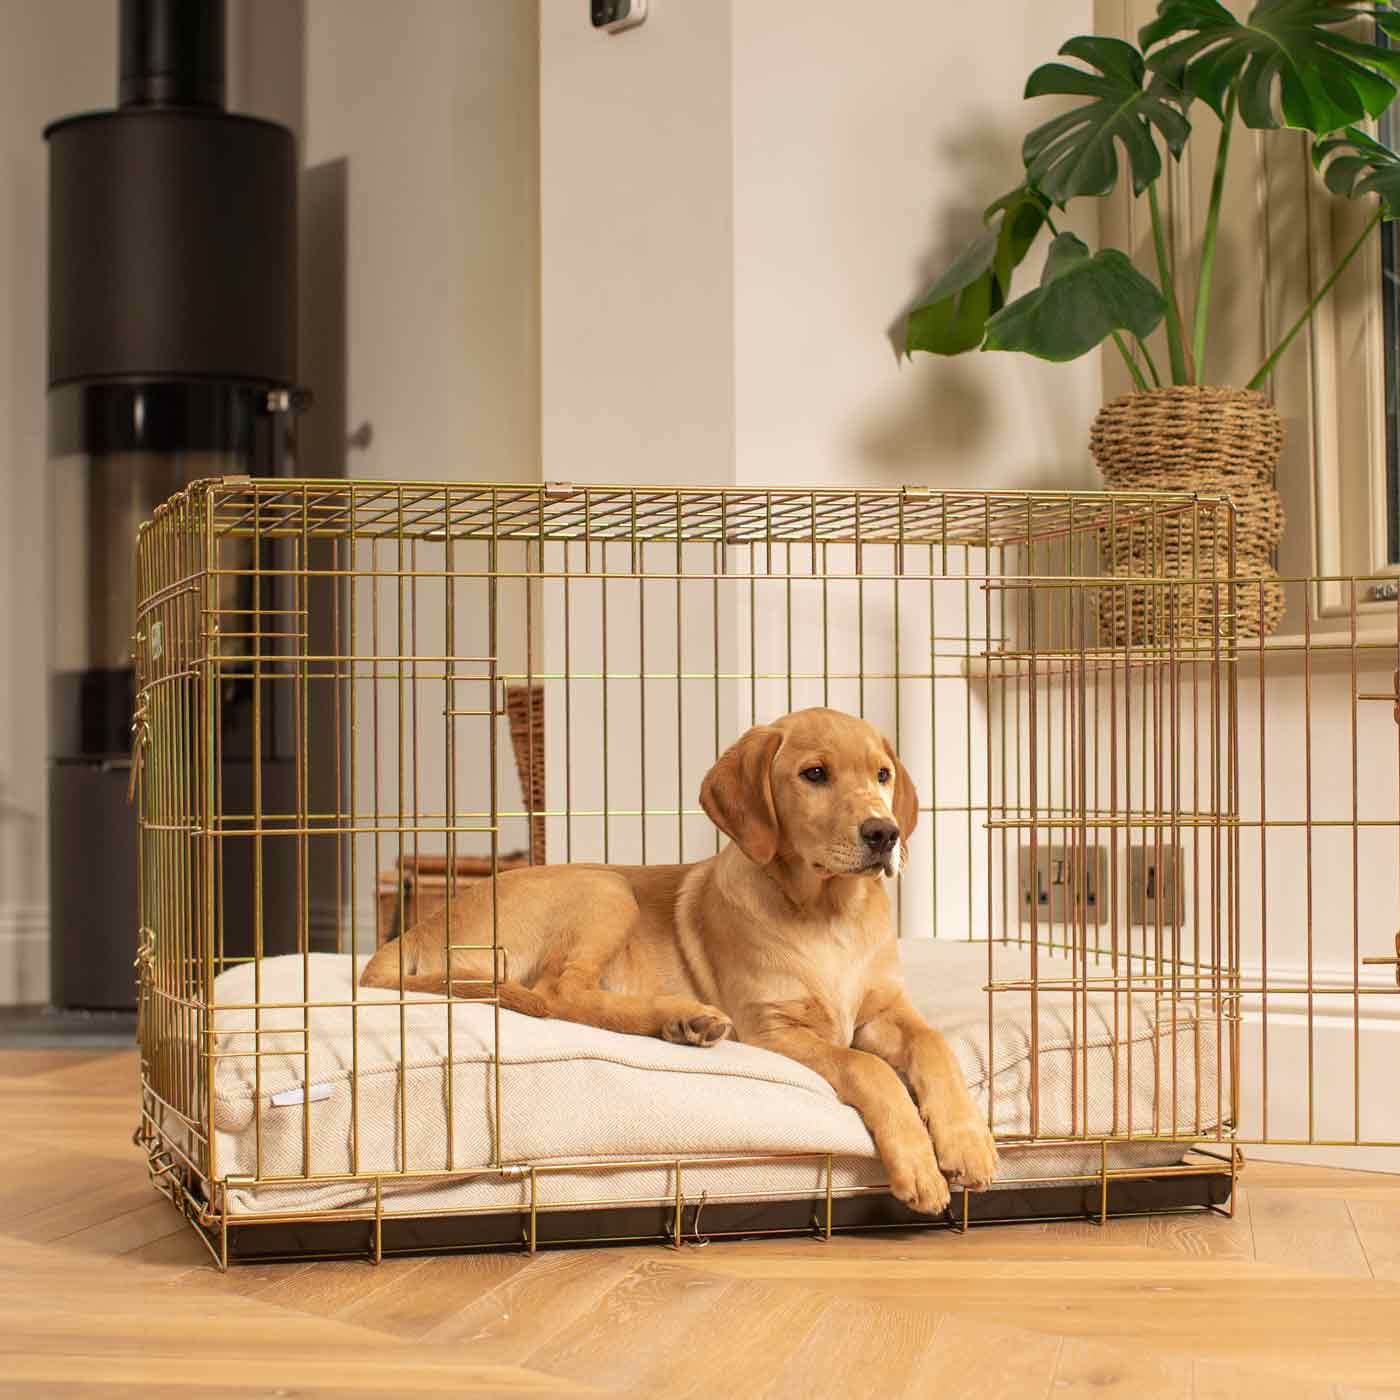 Luxury Dog Crate Cushion, Natural Herringbone Tweed Crate Cushion The Perfect Dog Crate Accessory, Available To Personalise Now at Lords & Labradors